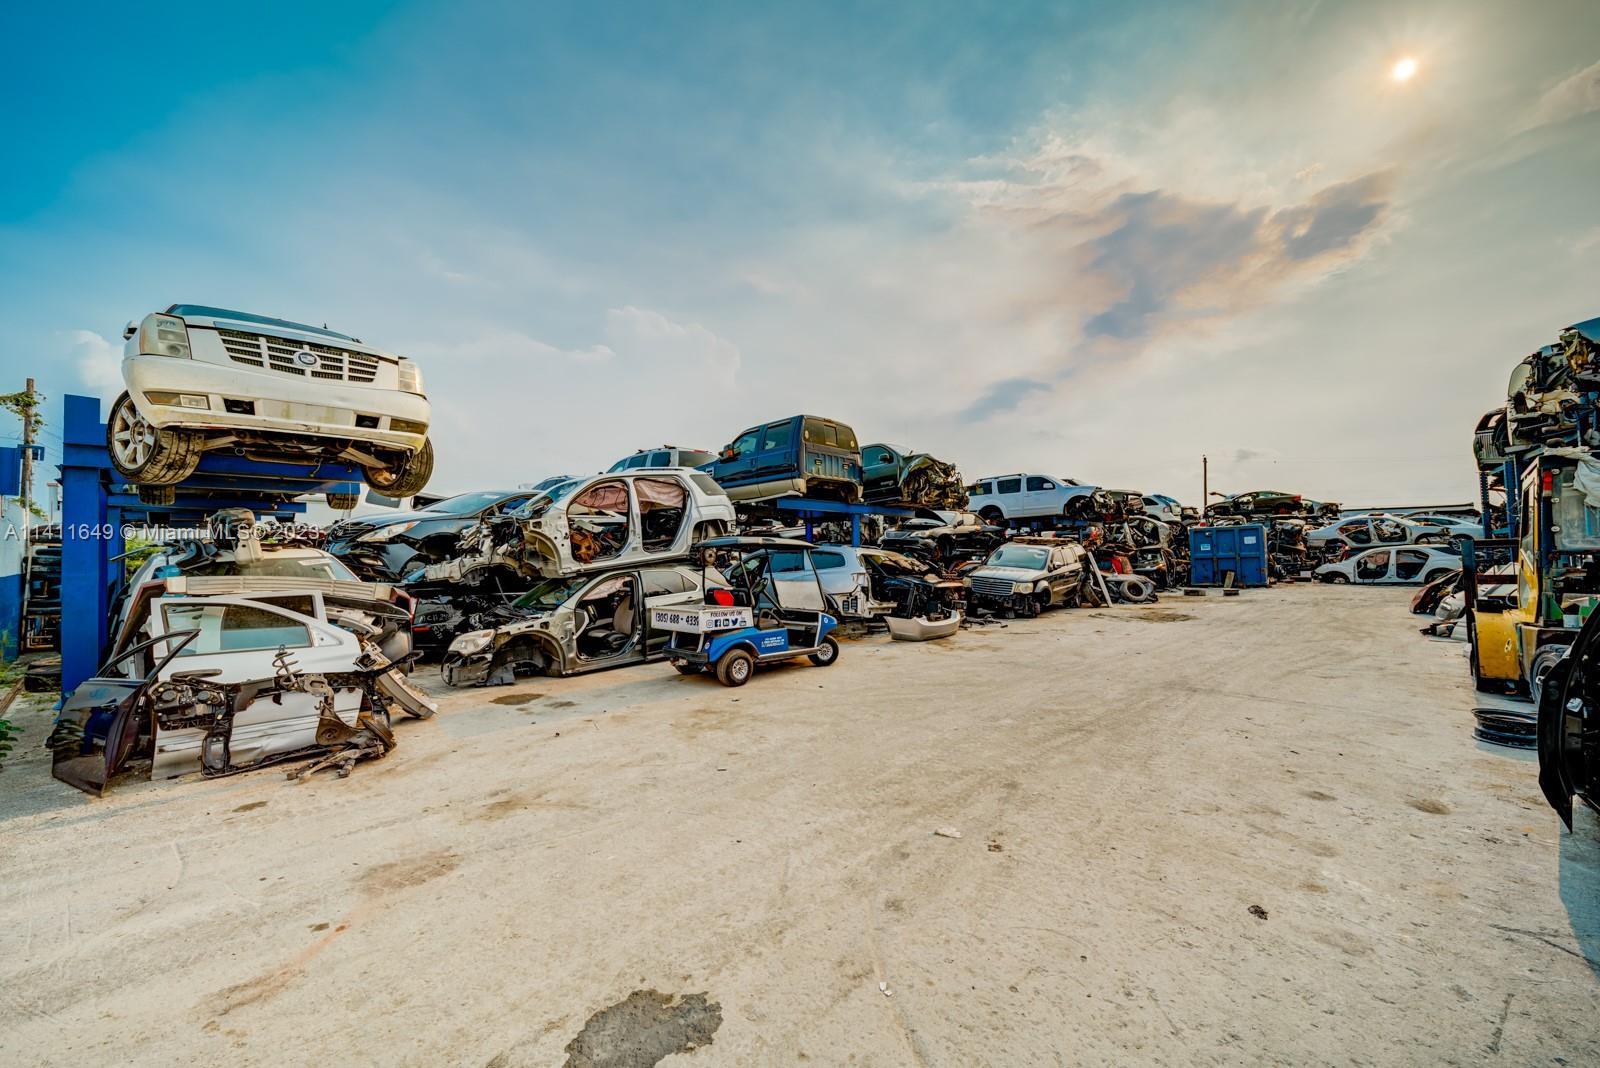 Photo of 2 Junkyards For Sale In S Florida With The Real Est Included in Miami, FL